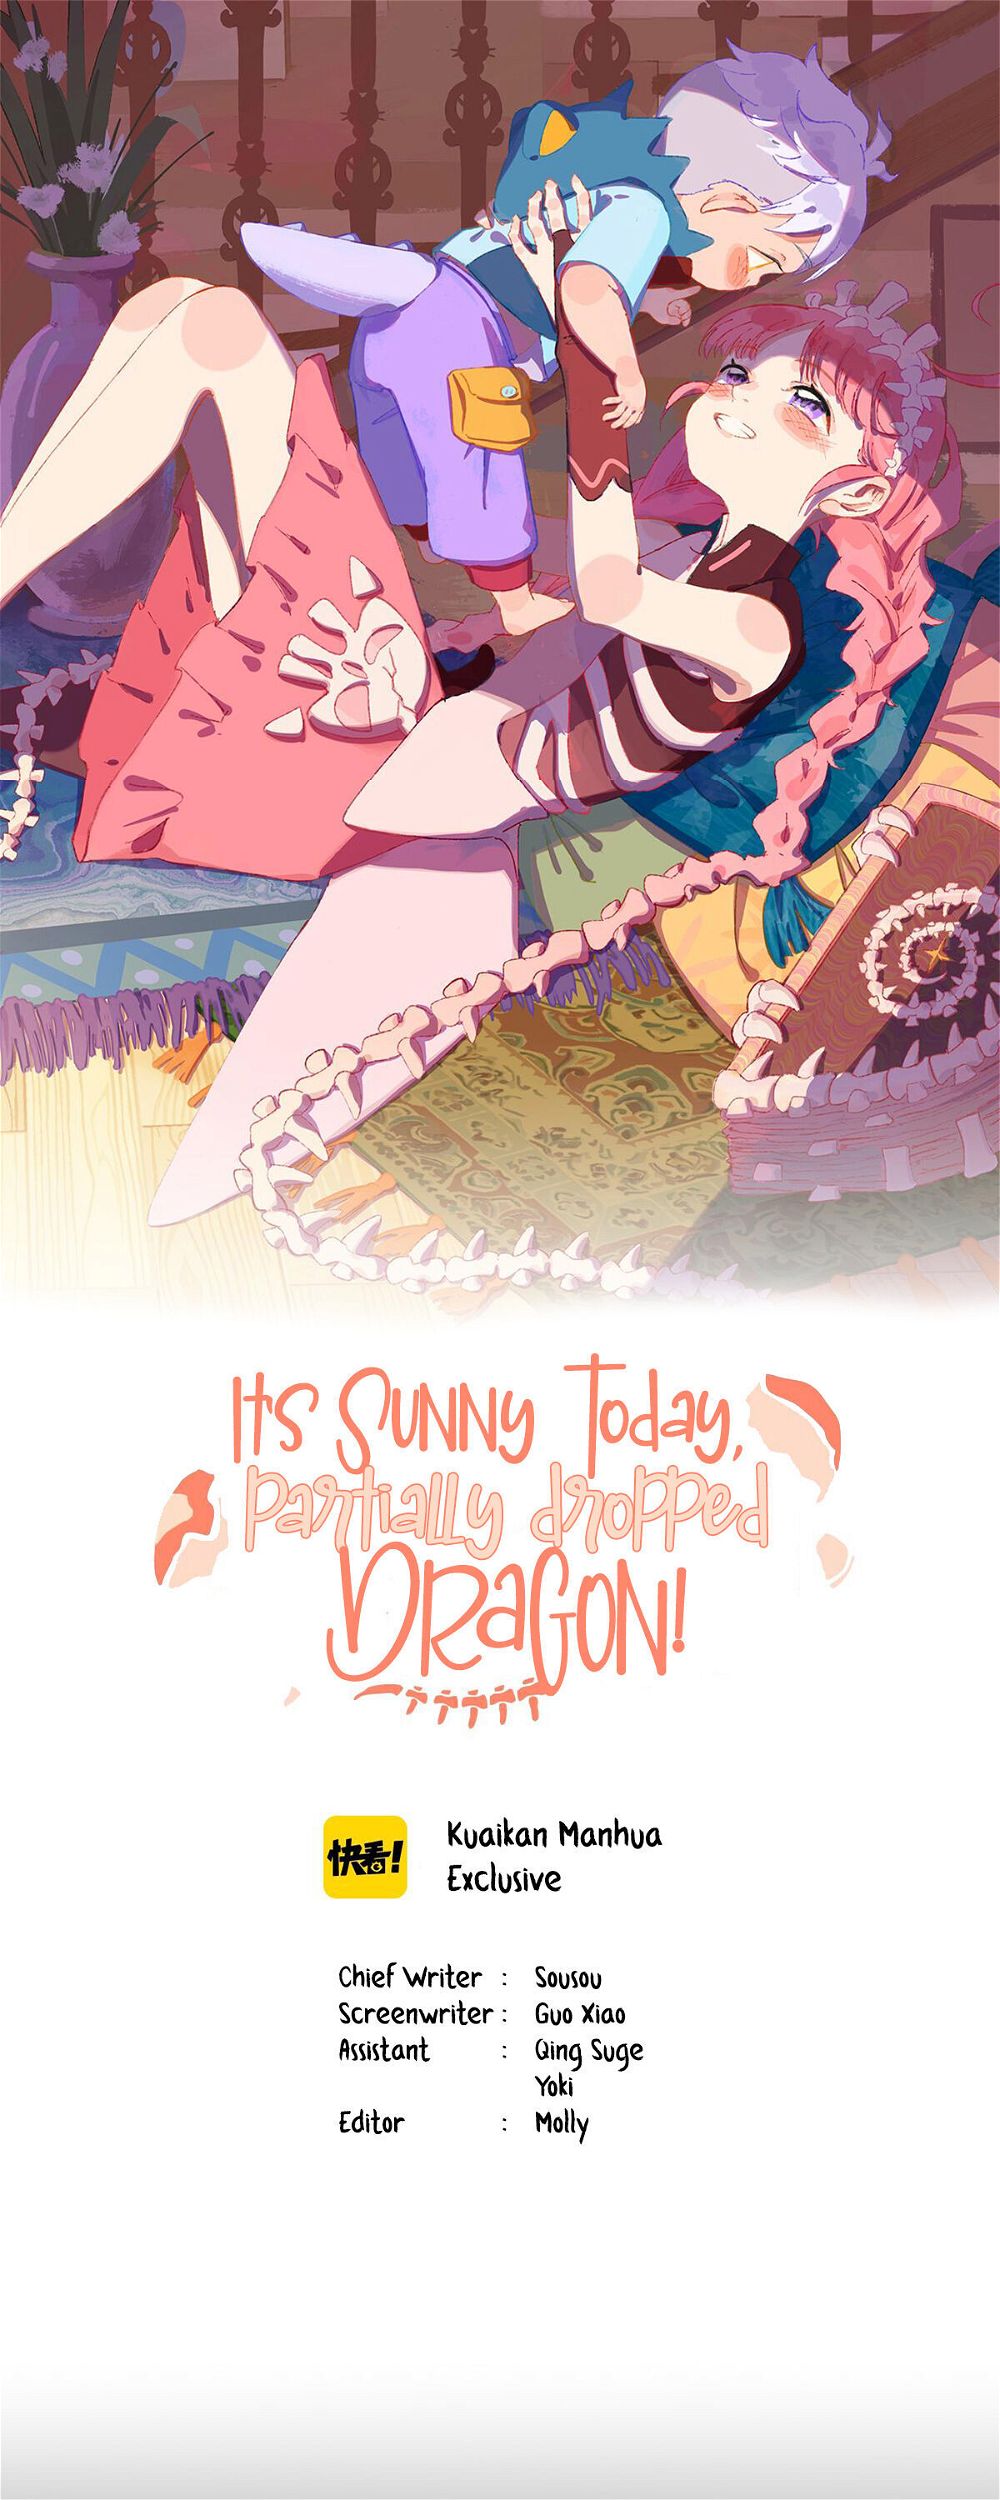 It’s Sunny Today, Partially Dropped Dragon! Chapter 25 - Page 1